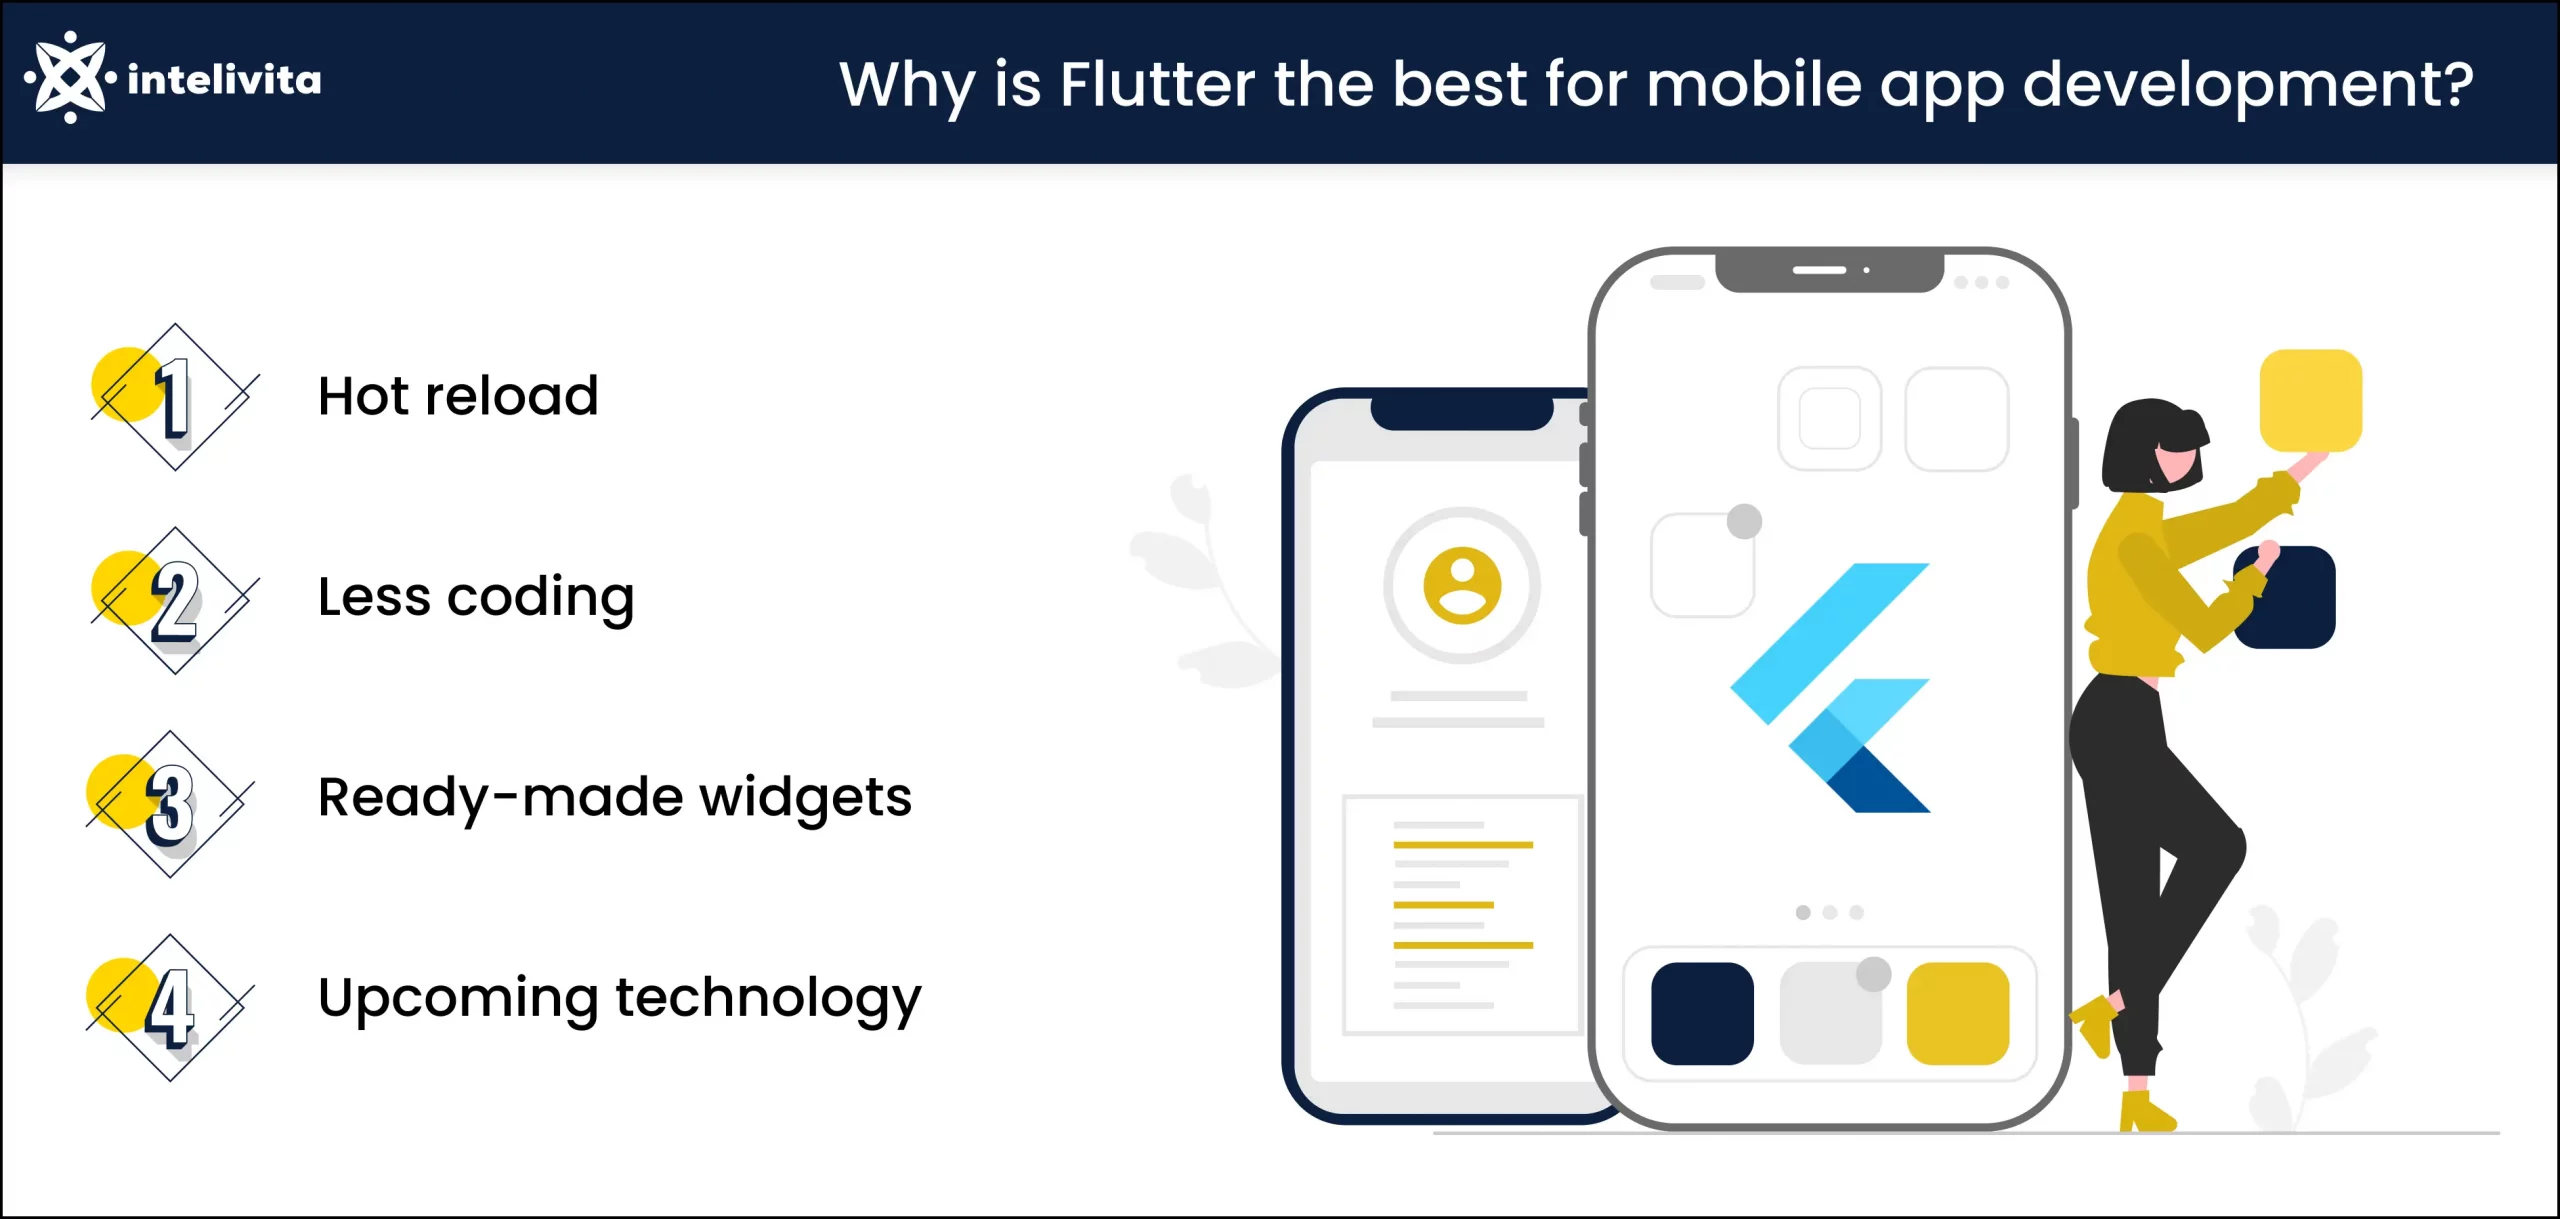 Image titled Why Flutter is Best for Mobile App Development and showing points 4 benefits of flutter for MVP development namely: 1: Hot Reload, 2: Less Coding, 3: Ready-made Widgets, and 4: Upcoming Technology